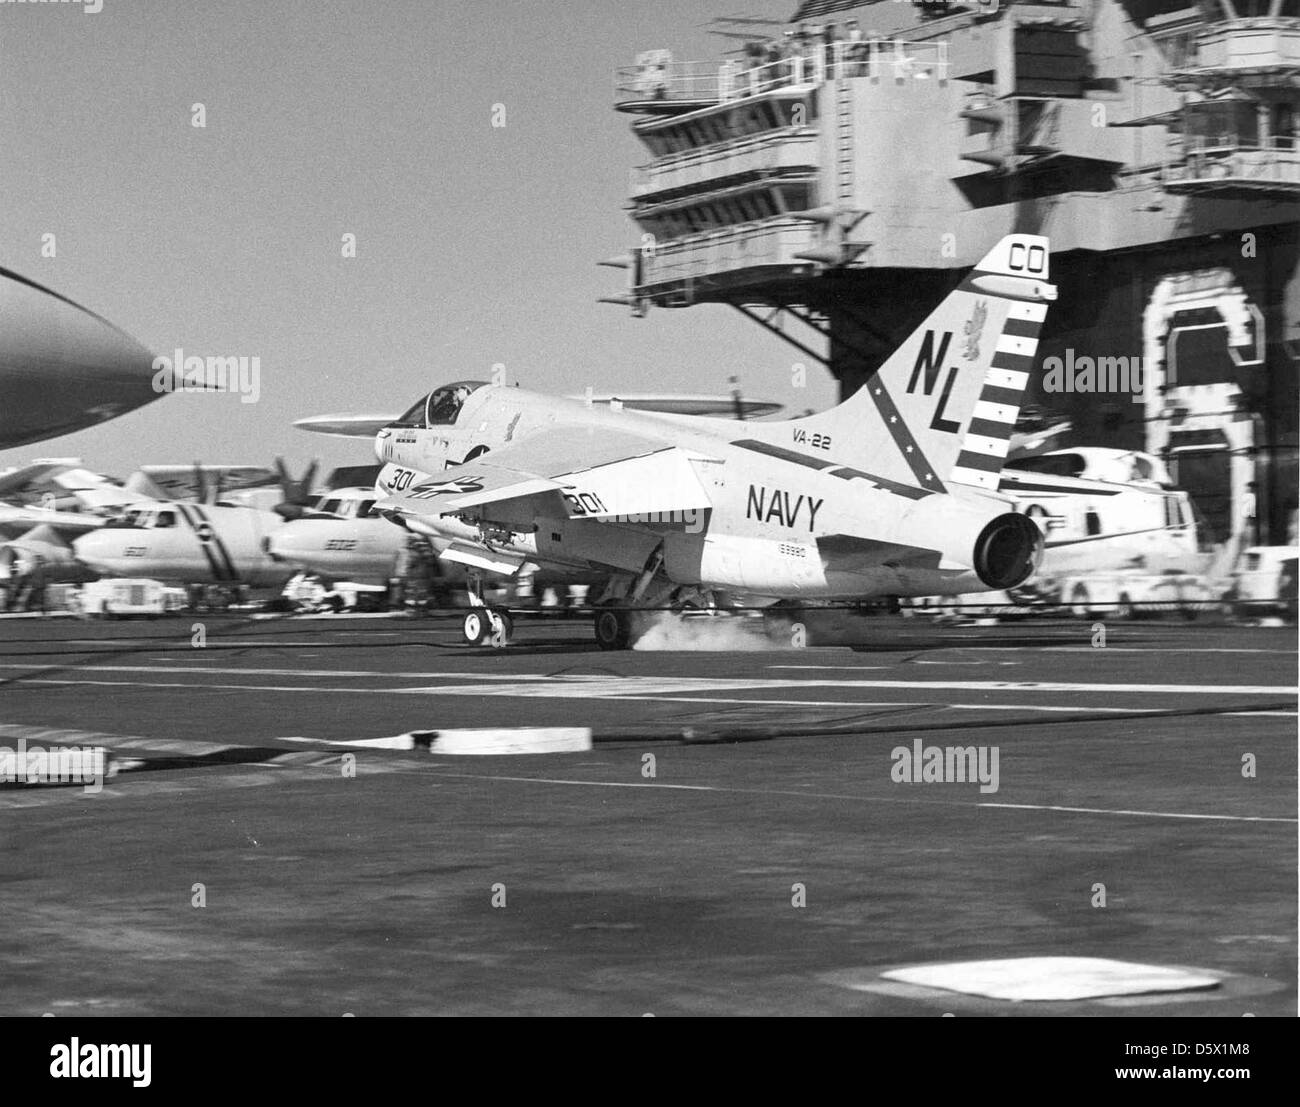 LTV A-7E 'Corsair II' of VA-22 having completed an arrested landing on the flight deck of the USS KITTY HAWK (CV-63). Stock Photo